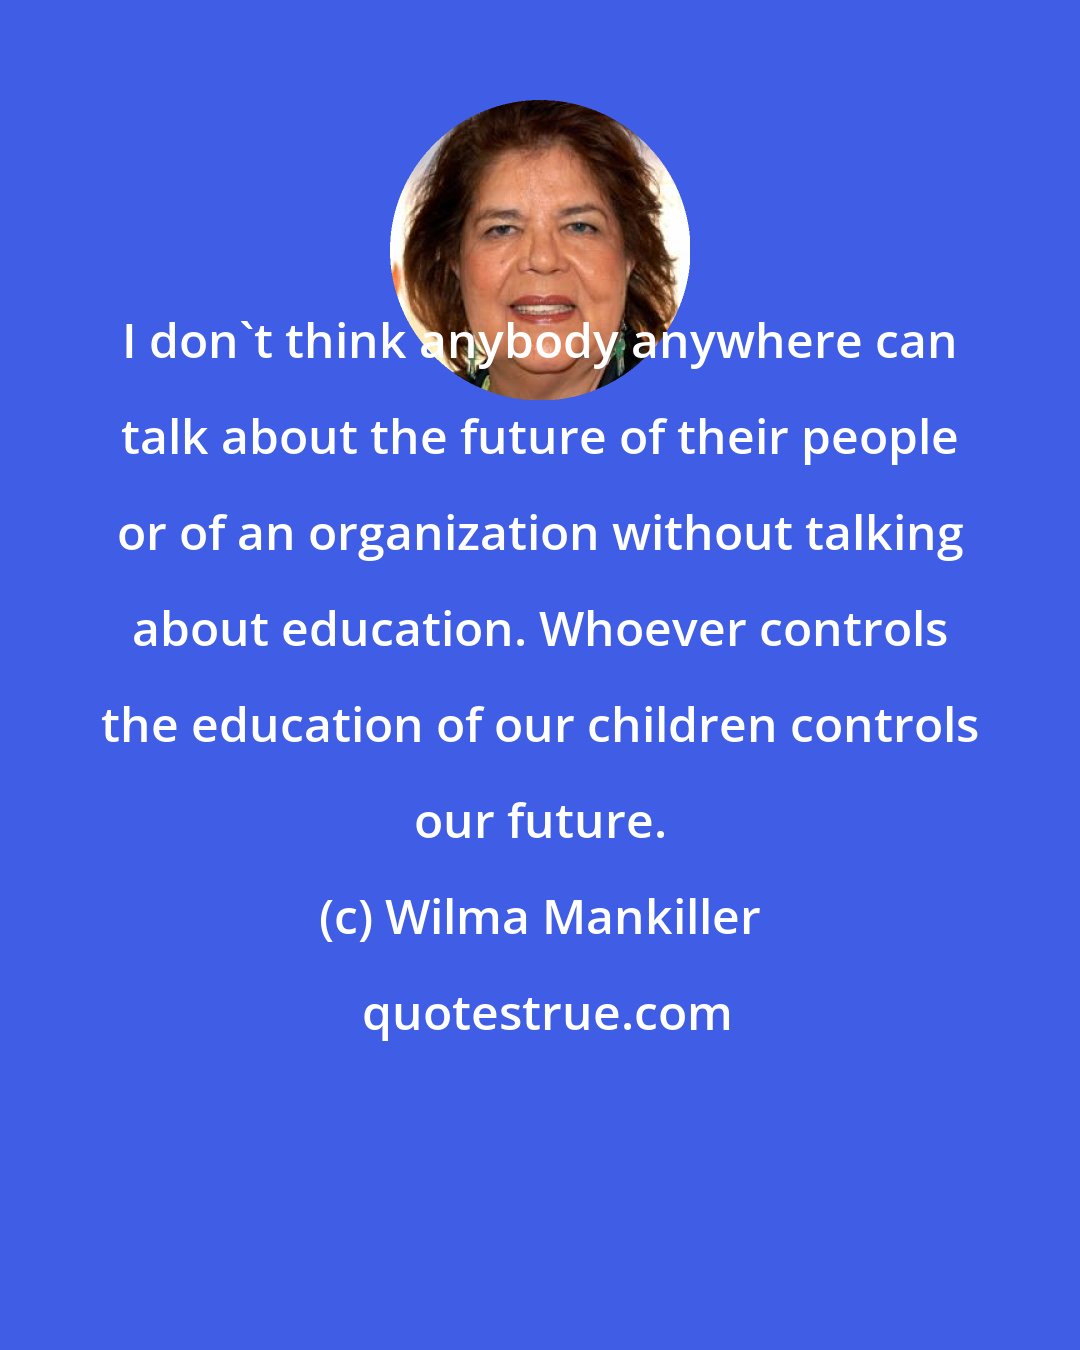 Wilma Mankiller: I don't think anybody anywhere can talk about the future of their people or of an organization without talking about education. Whoever controls the education of our children controls our future.